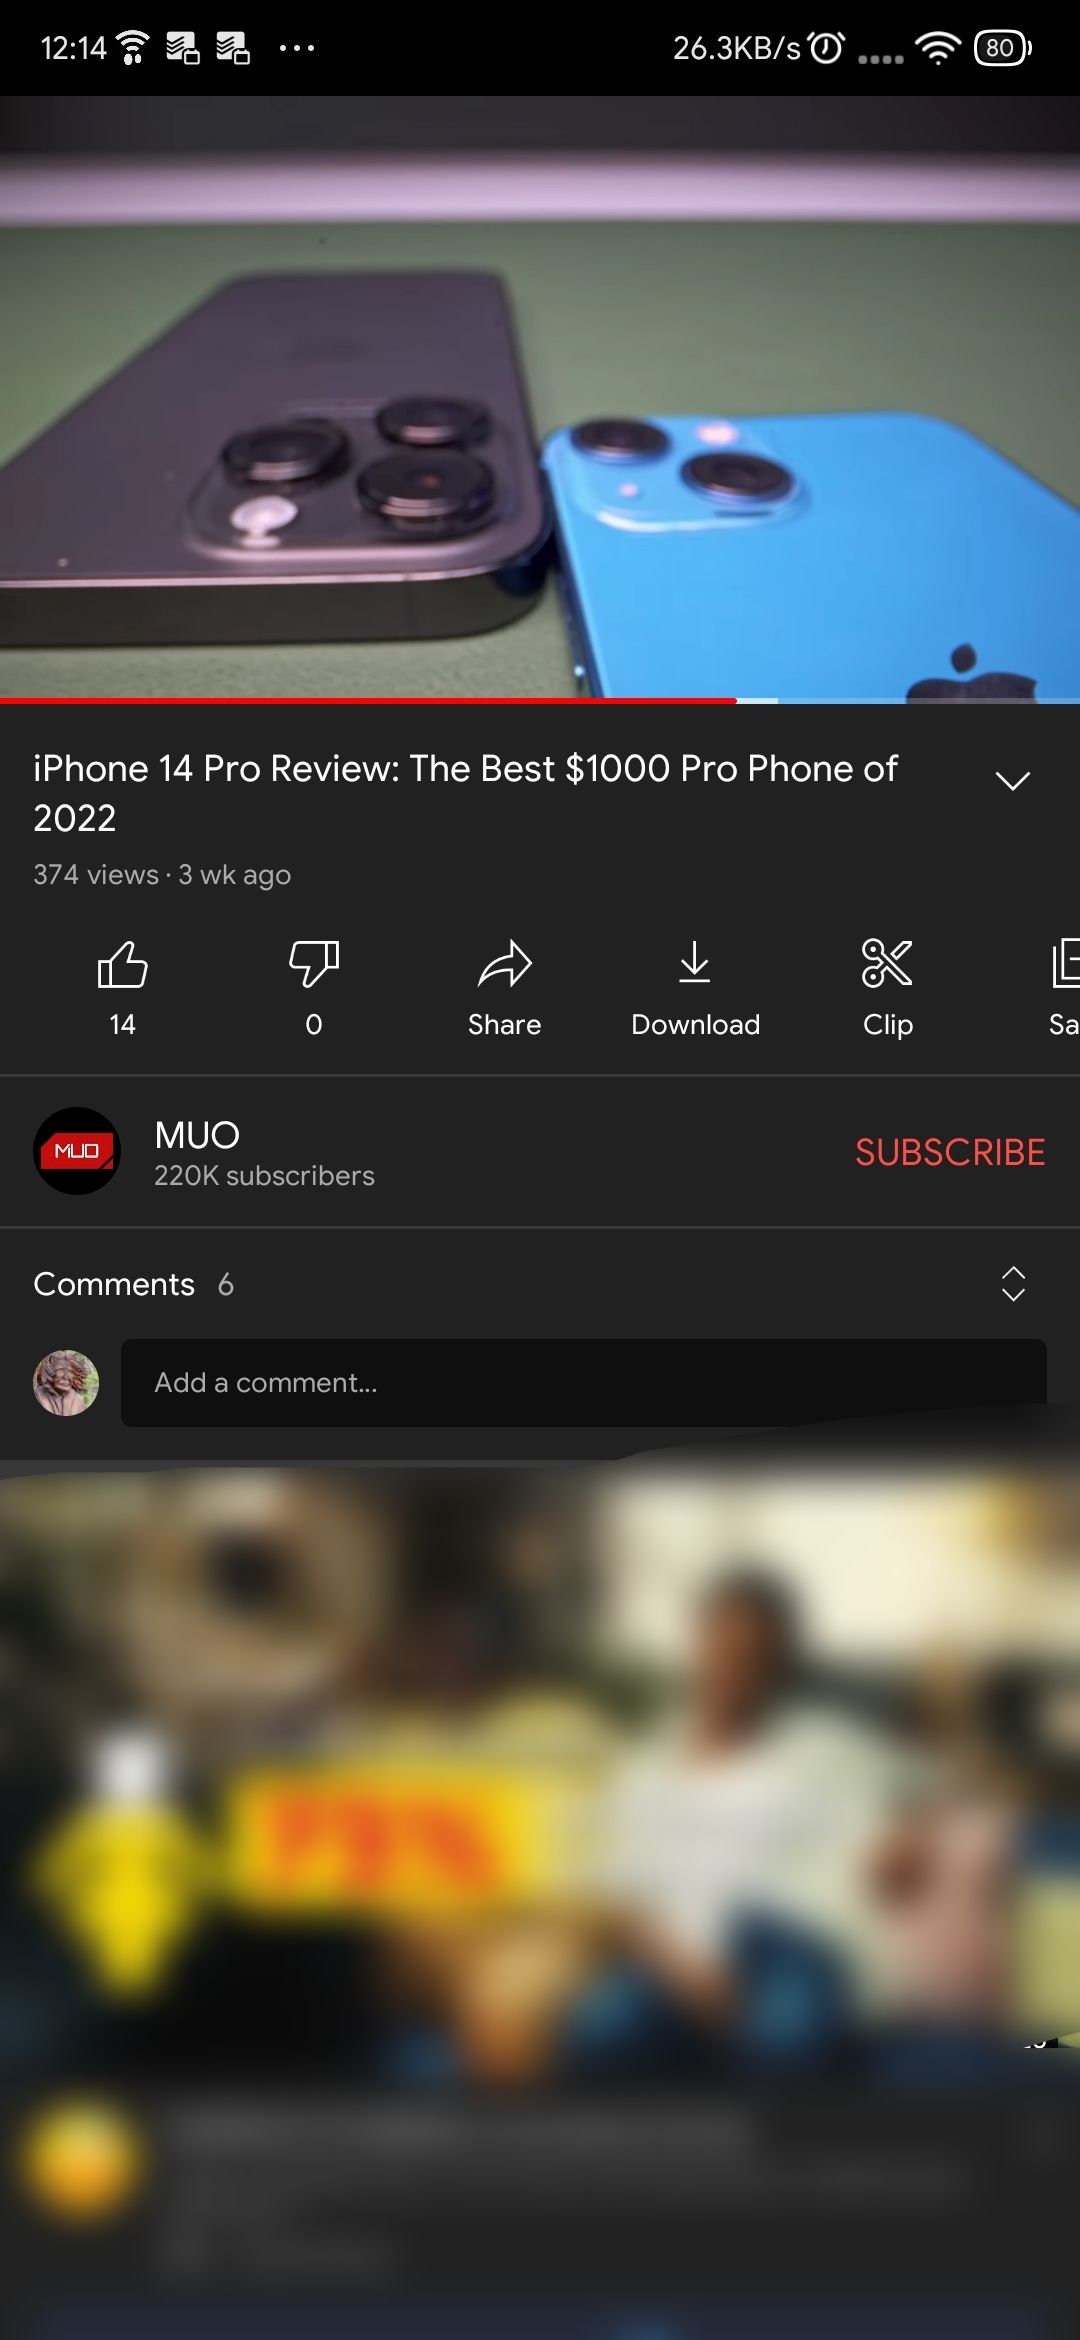 A YouTube video playing on mobile